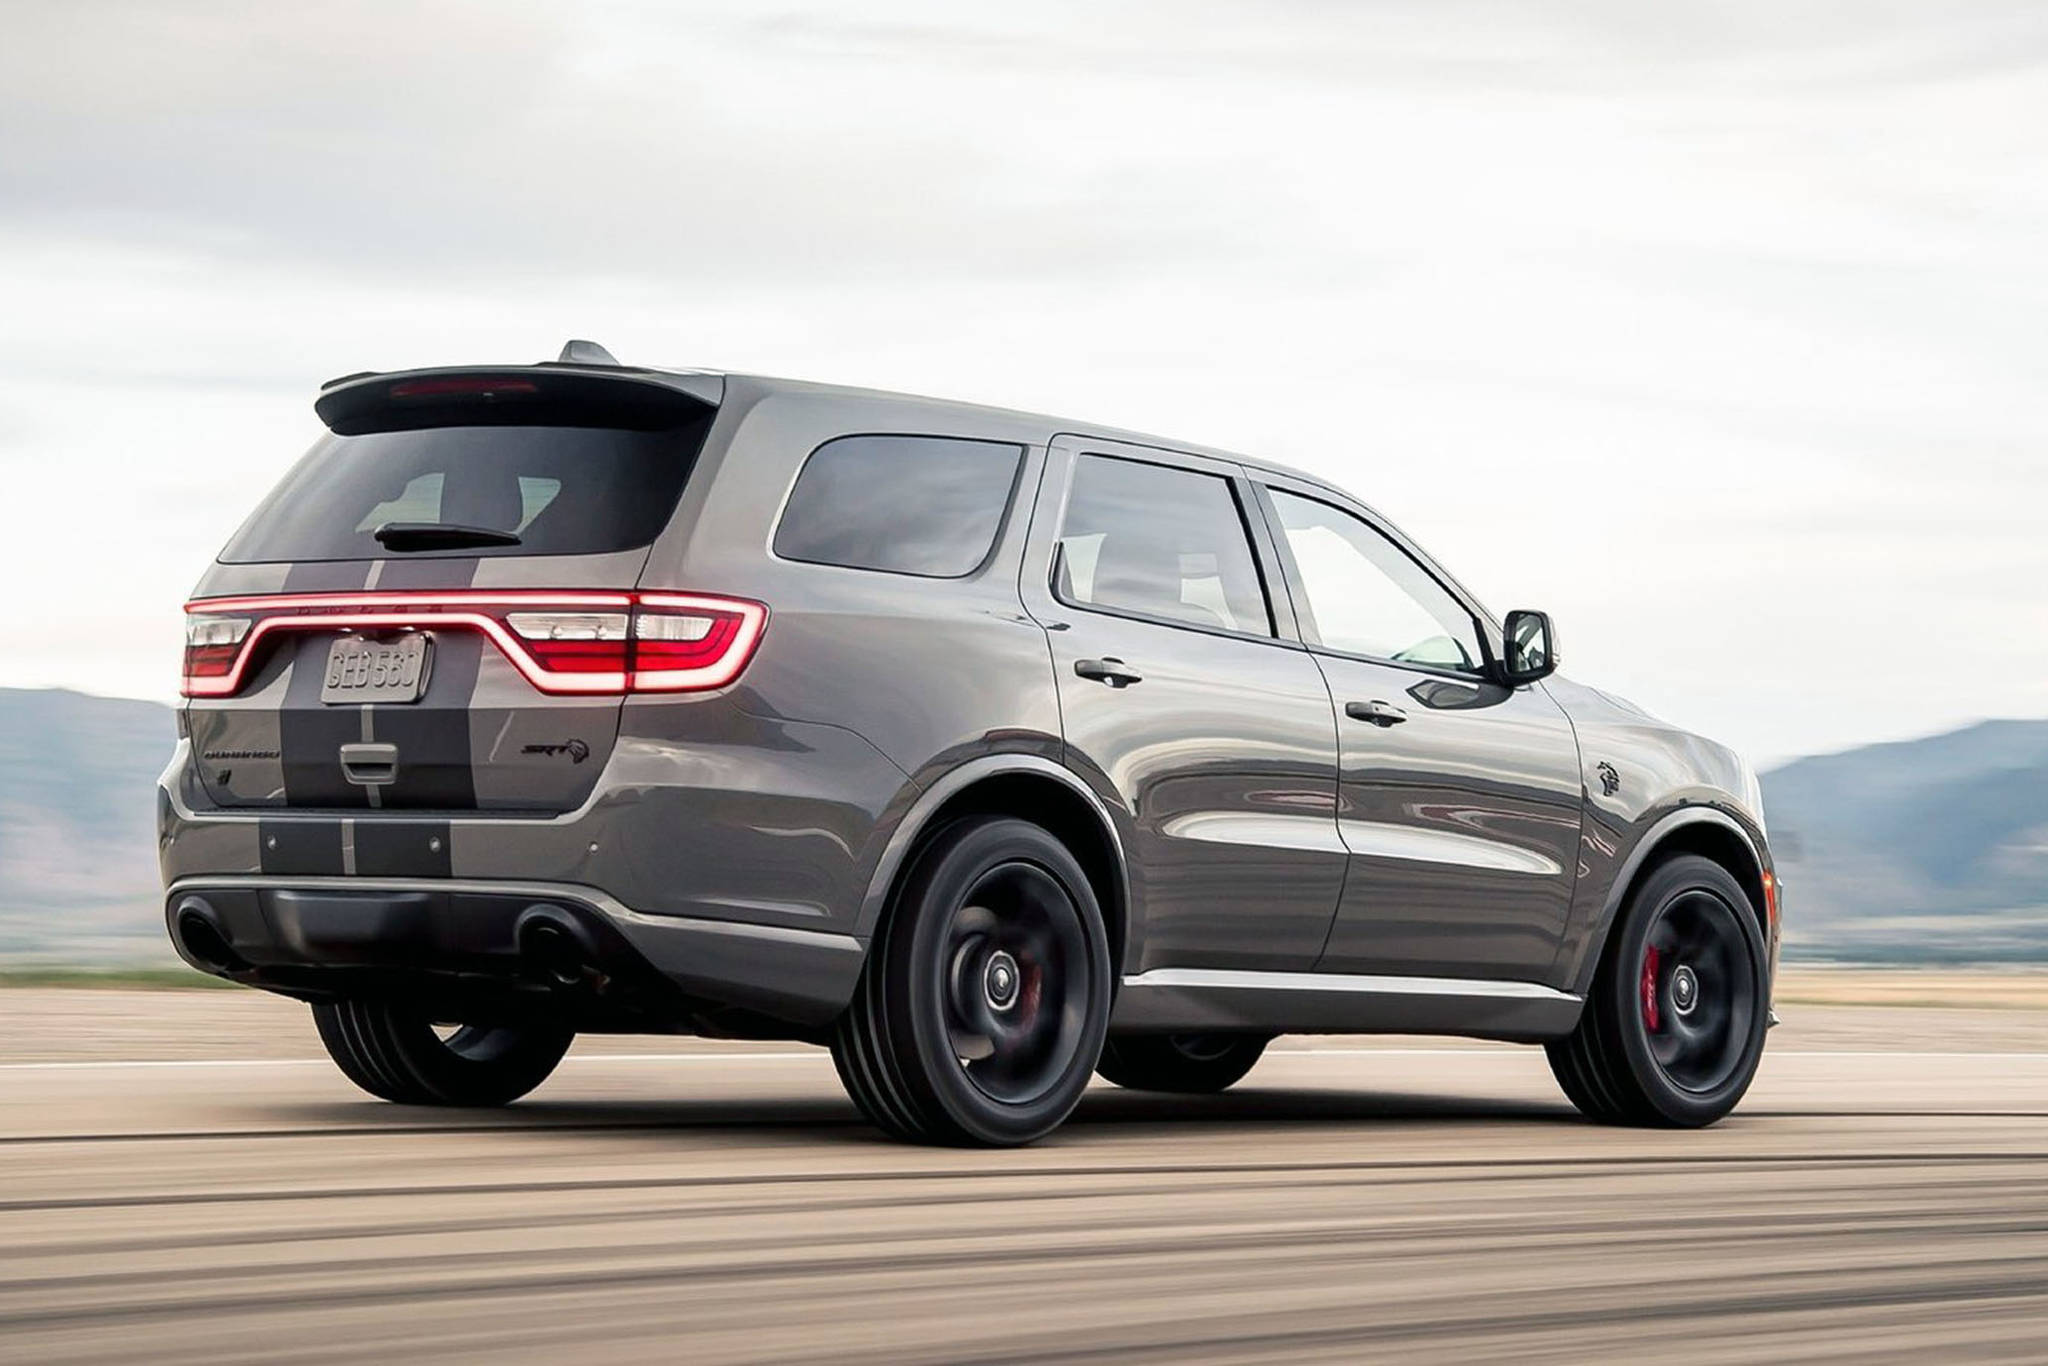 The current-generation Durango uses the Jeep Grand Cherokee platform and dates back to the 2011 model year, but since then has received regular updates both inside and out. PHOTO: DODGE